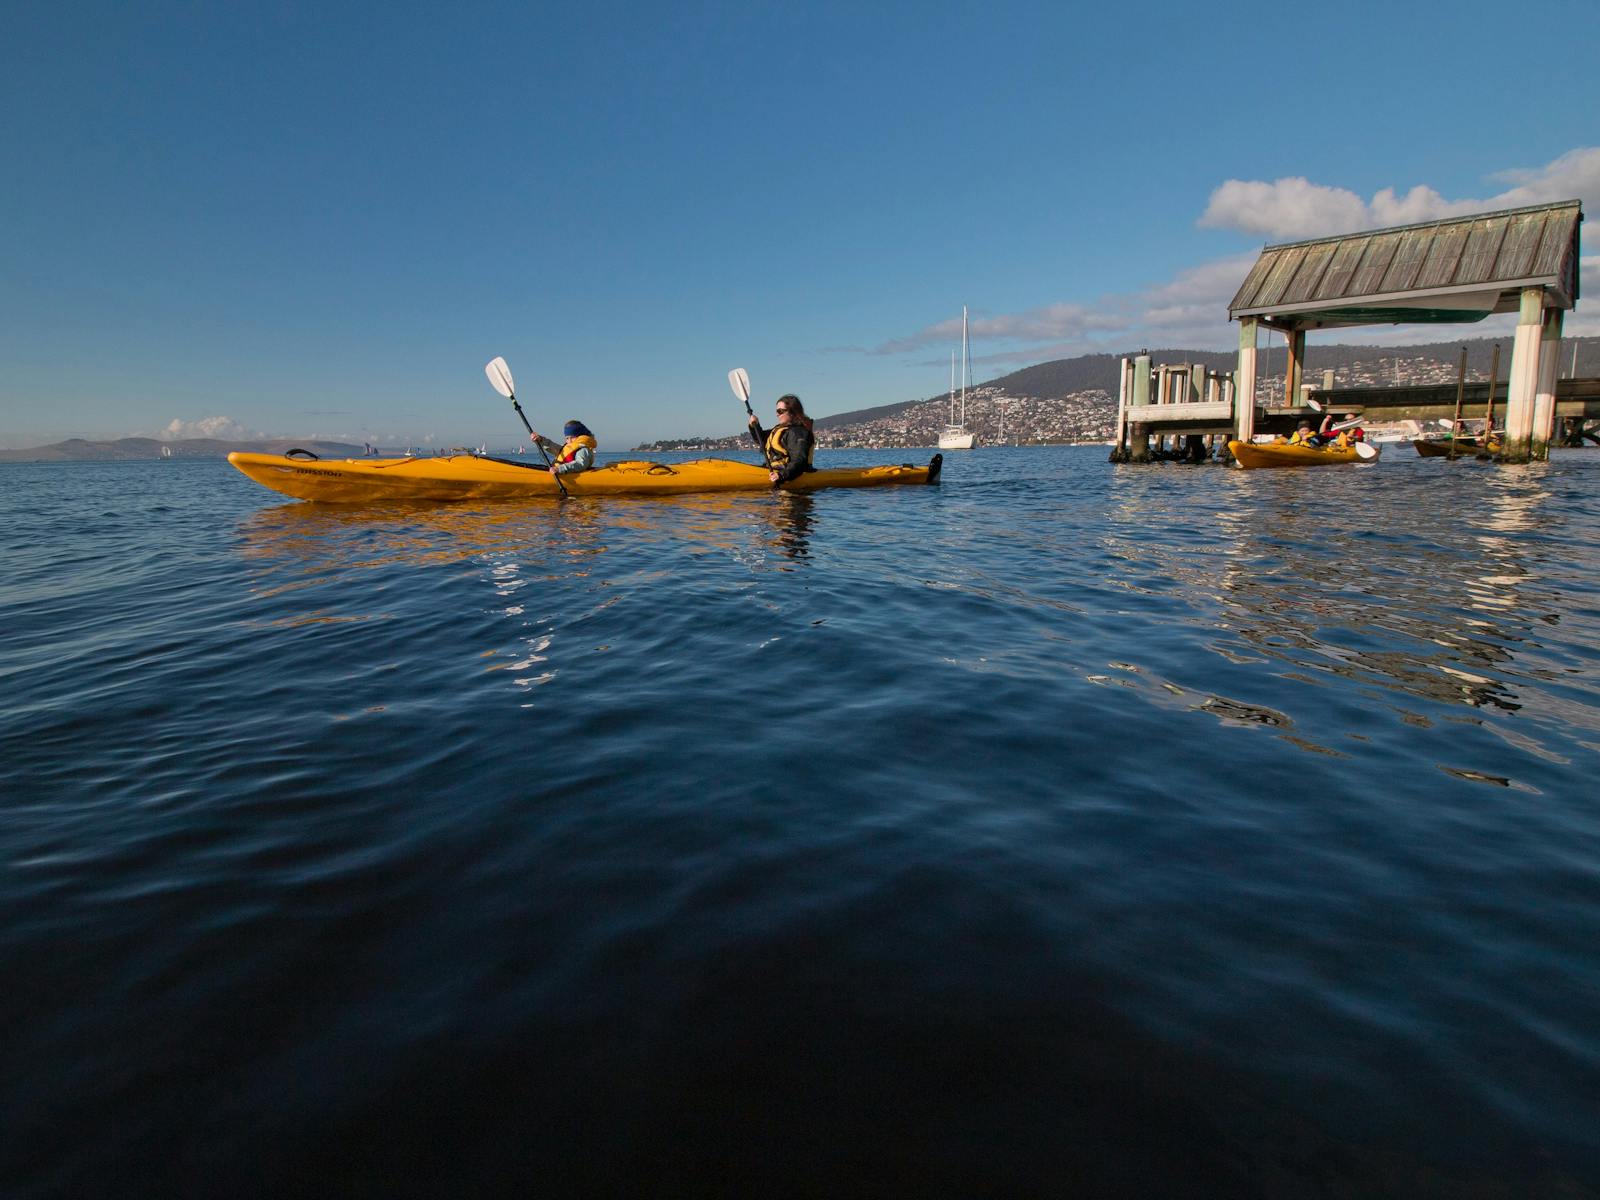 Kayakers paddling under jetties on the Derwent River, Hobart